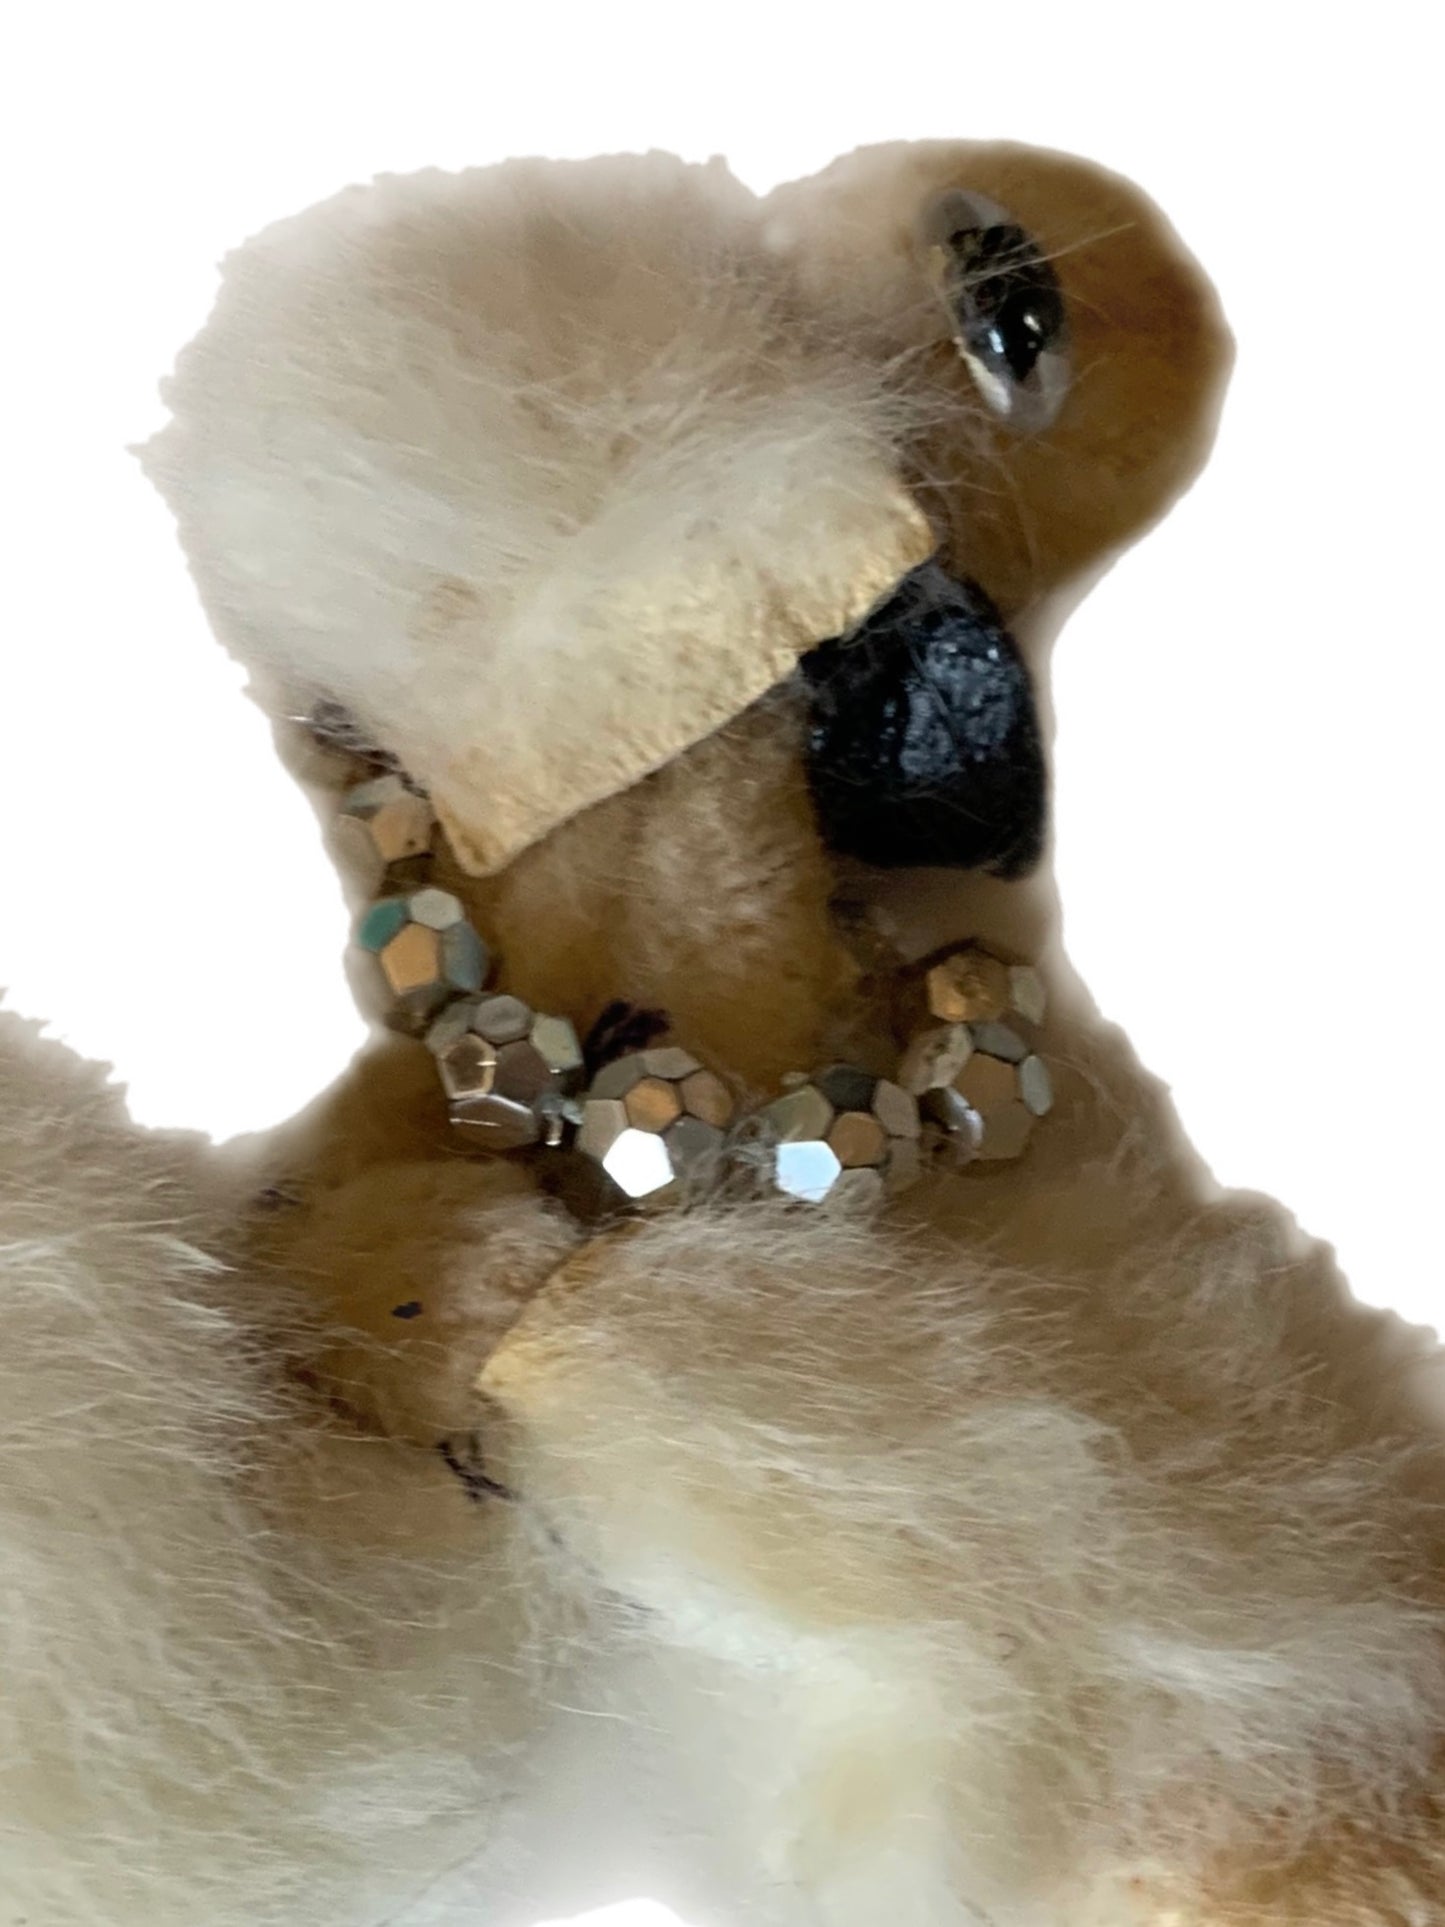 Rabbit Fur and Beads Poodle Brooch circa 1950s